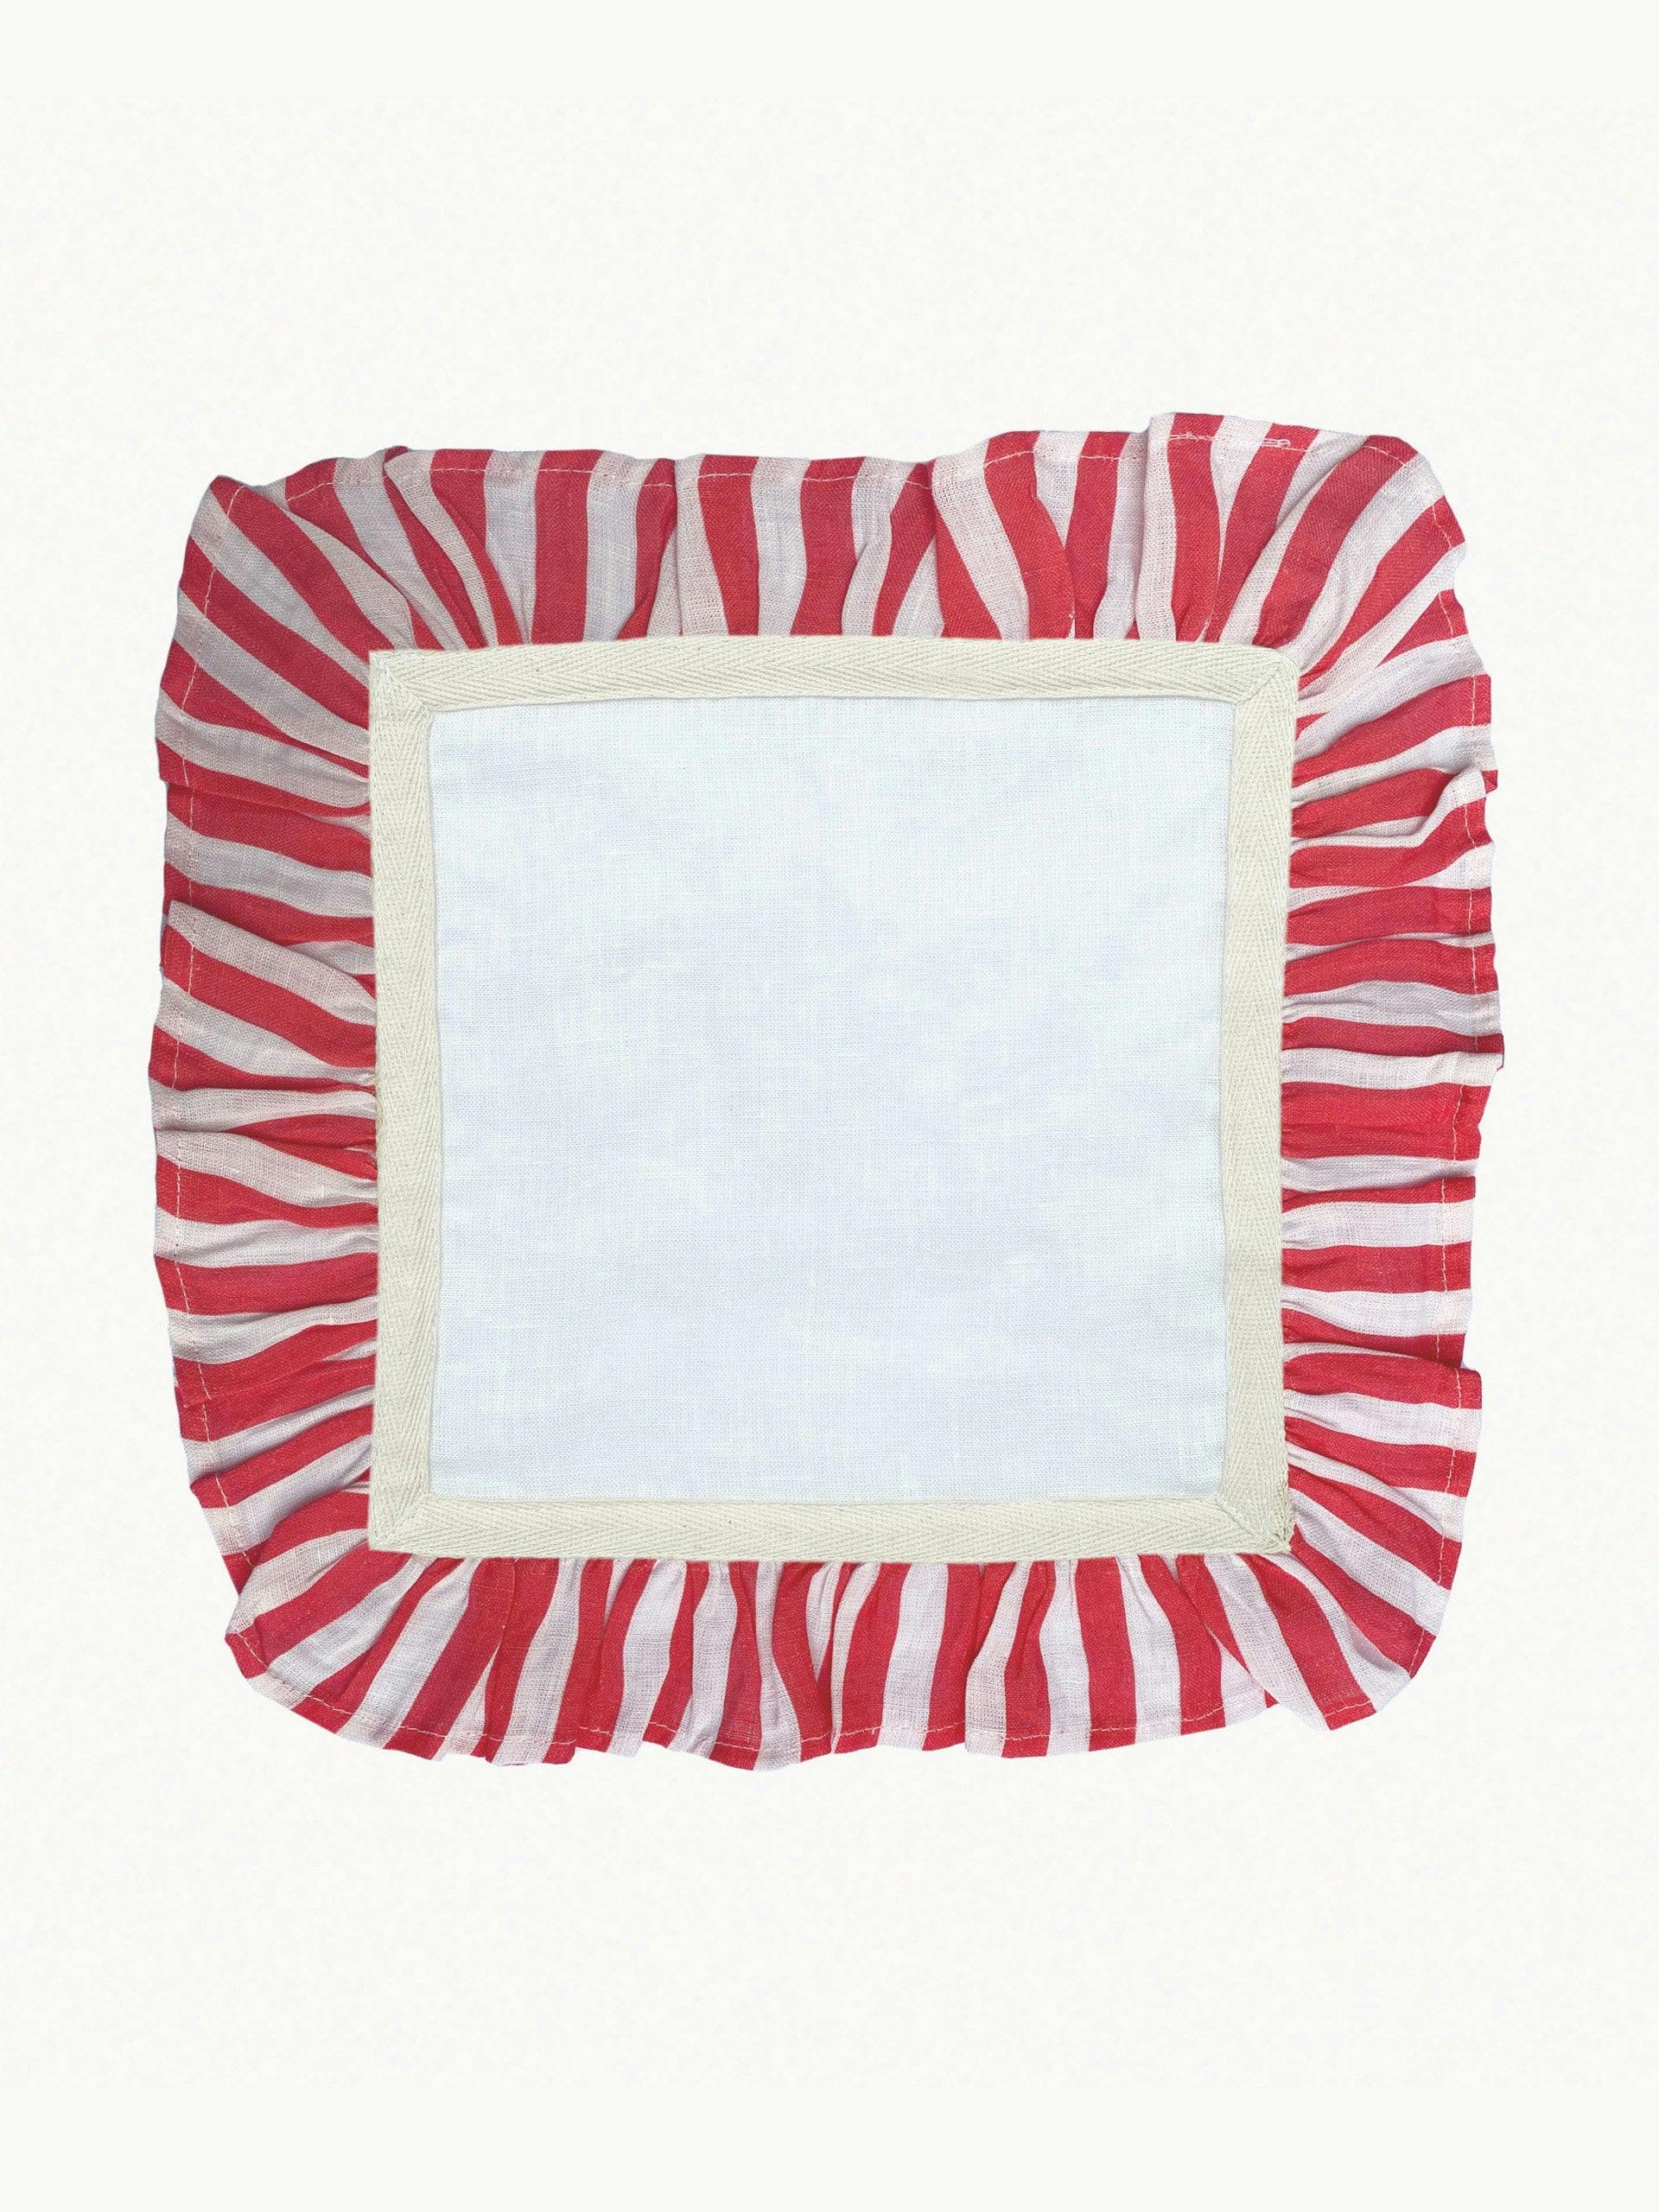 Cherry red candy stripe napkins (set of 2)